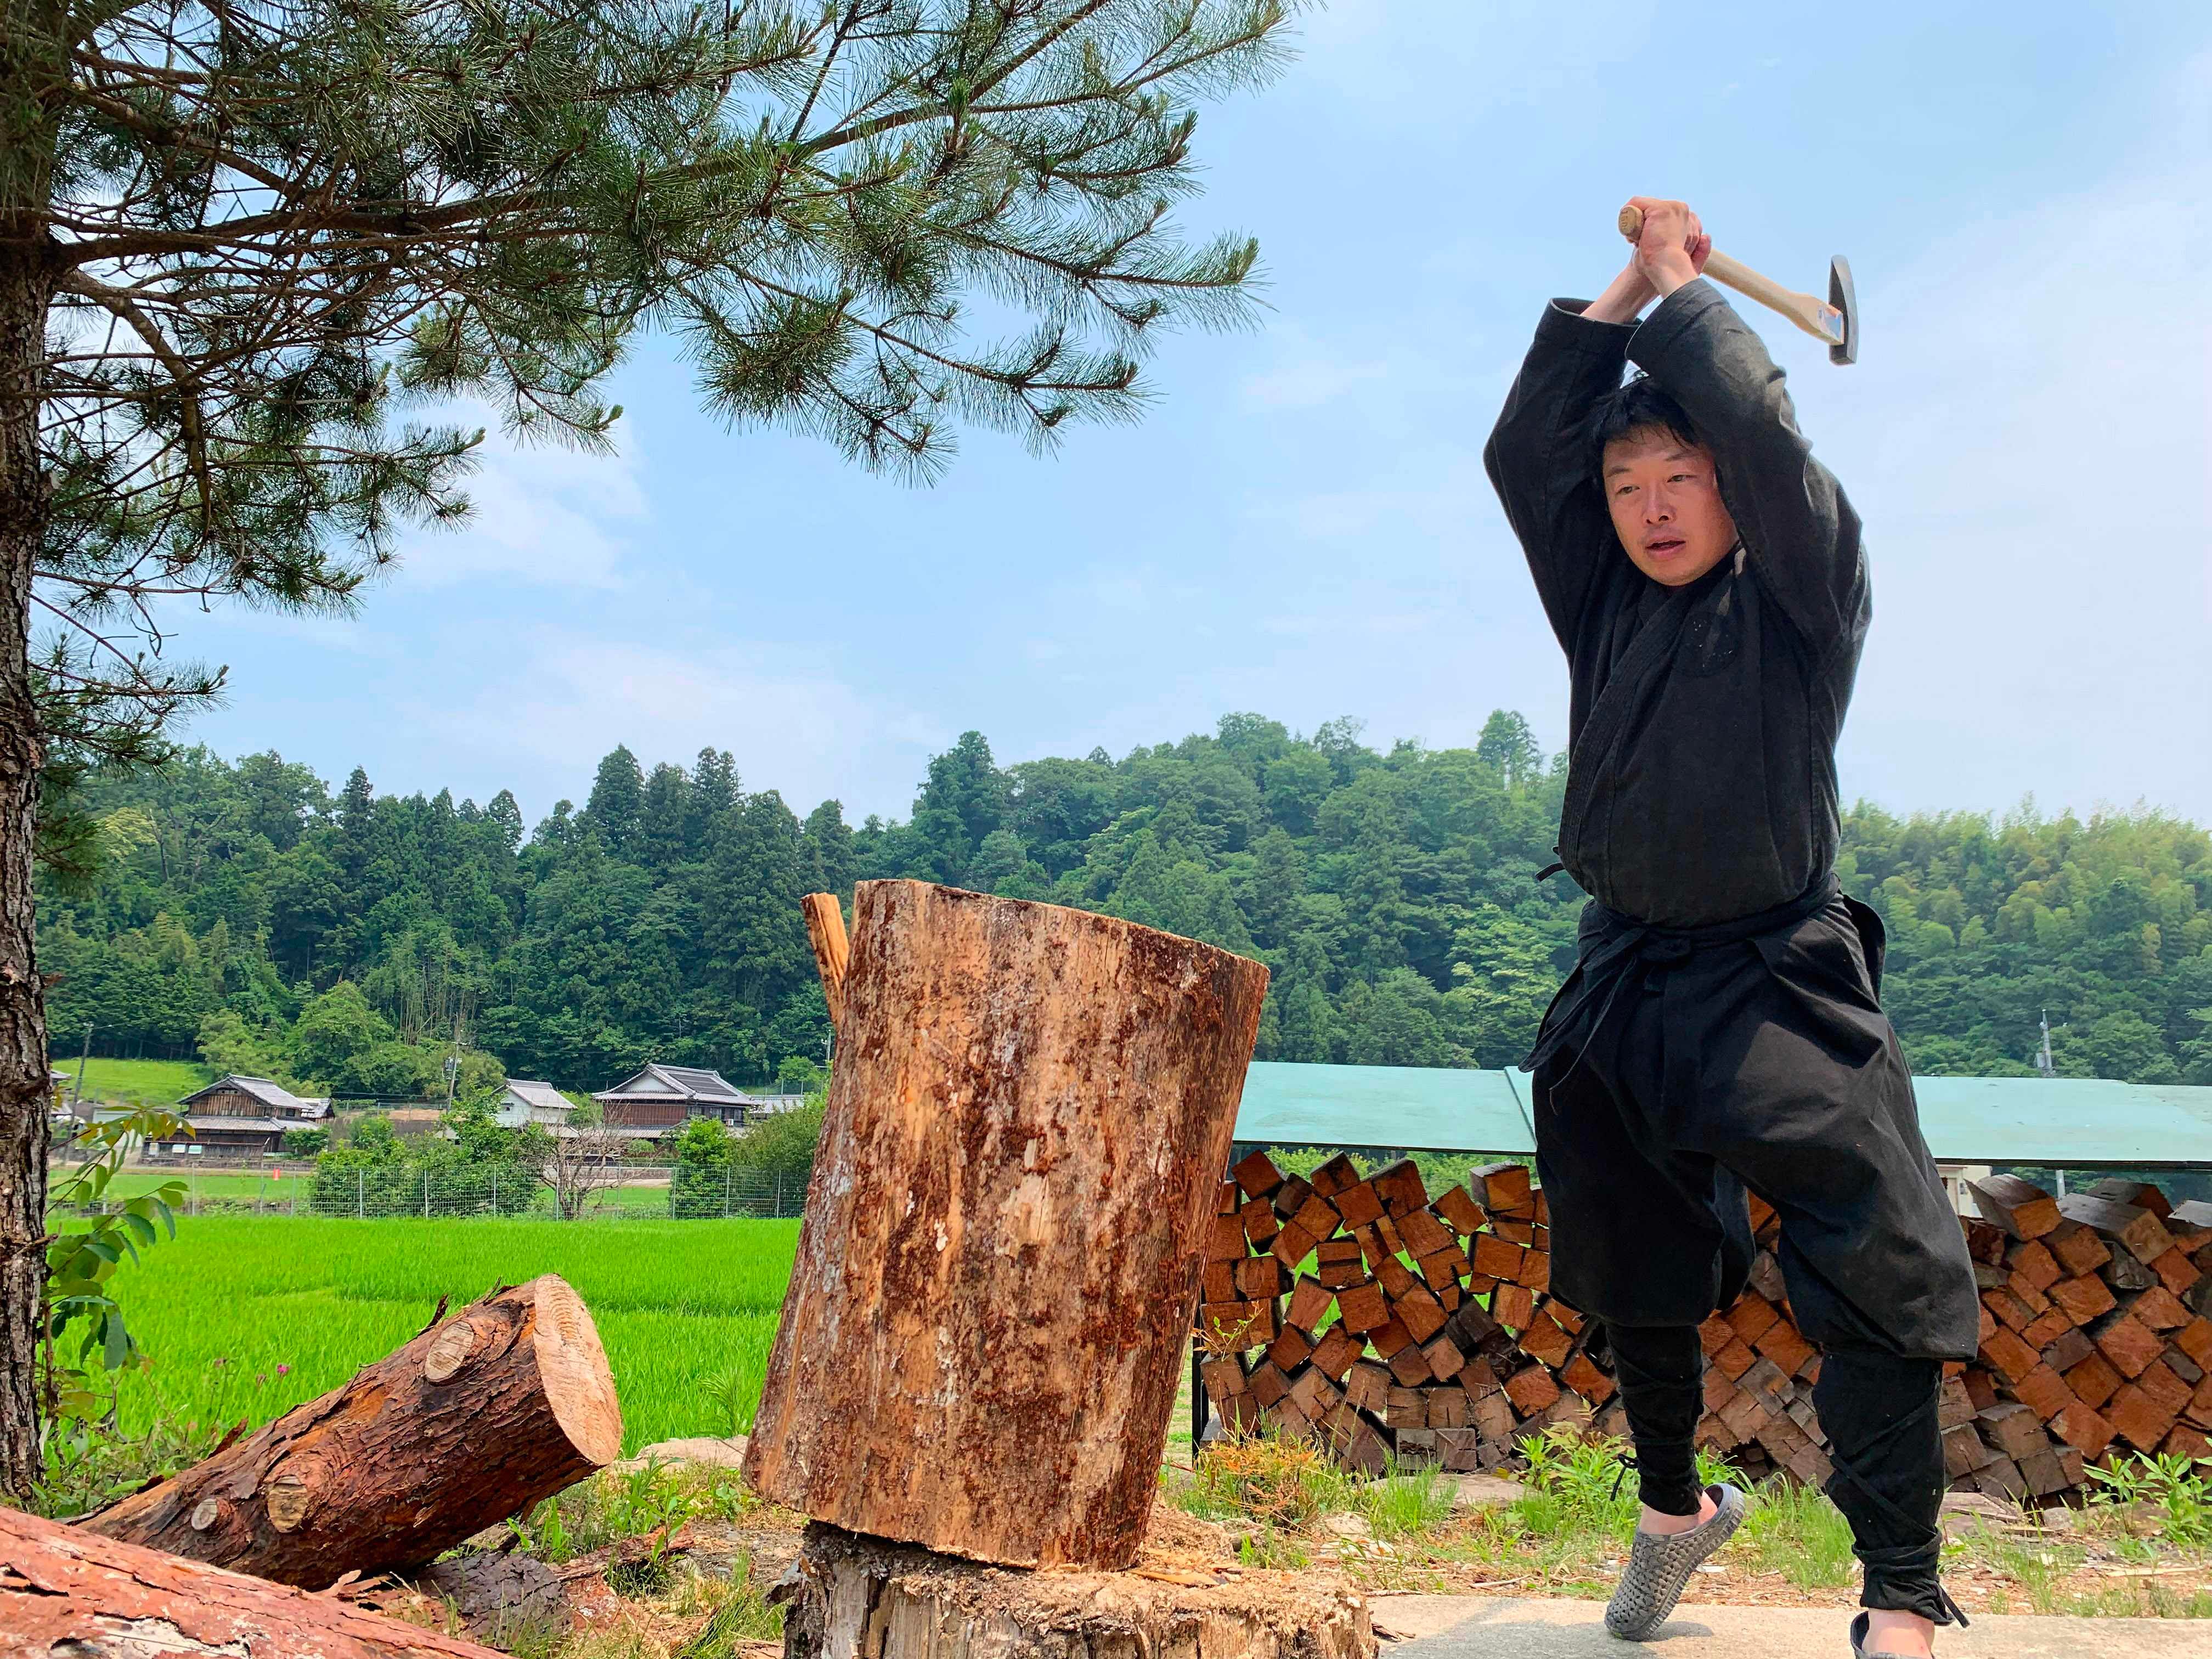 Genichi Mitsuhashi has become the first student ever to graduate from a Japanese university with a master's degree in ninja studies. (Photo by Handout /Genichi Mitsuhashi / AFP)